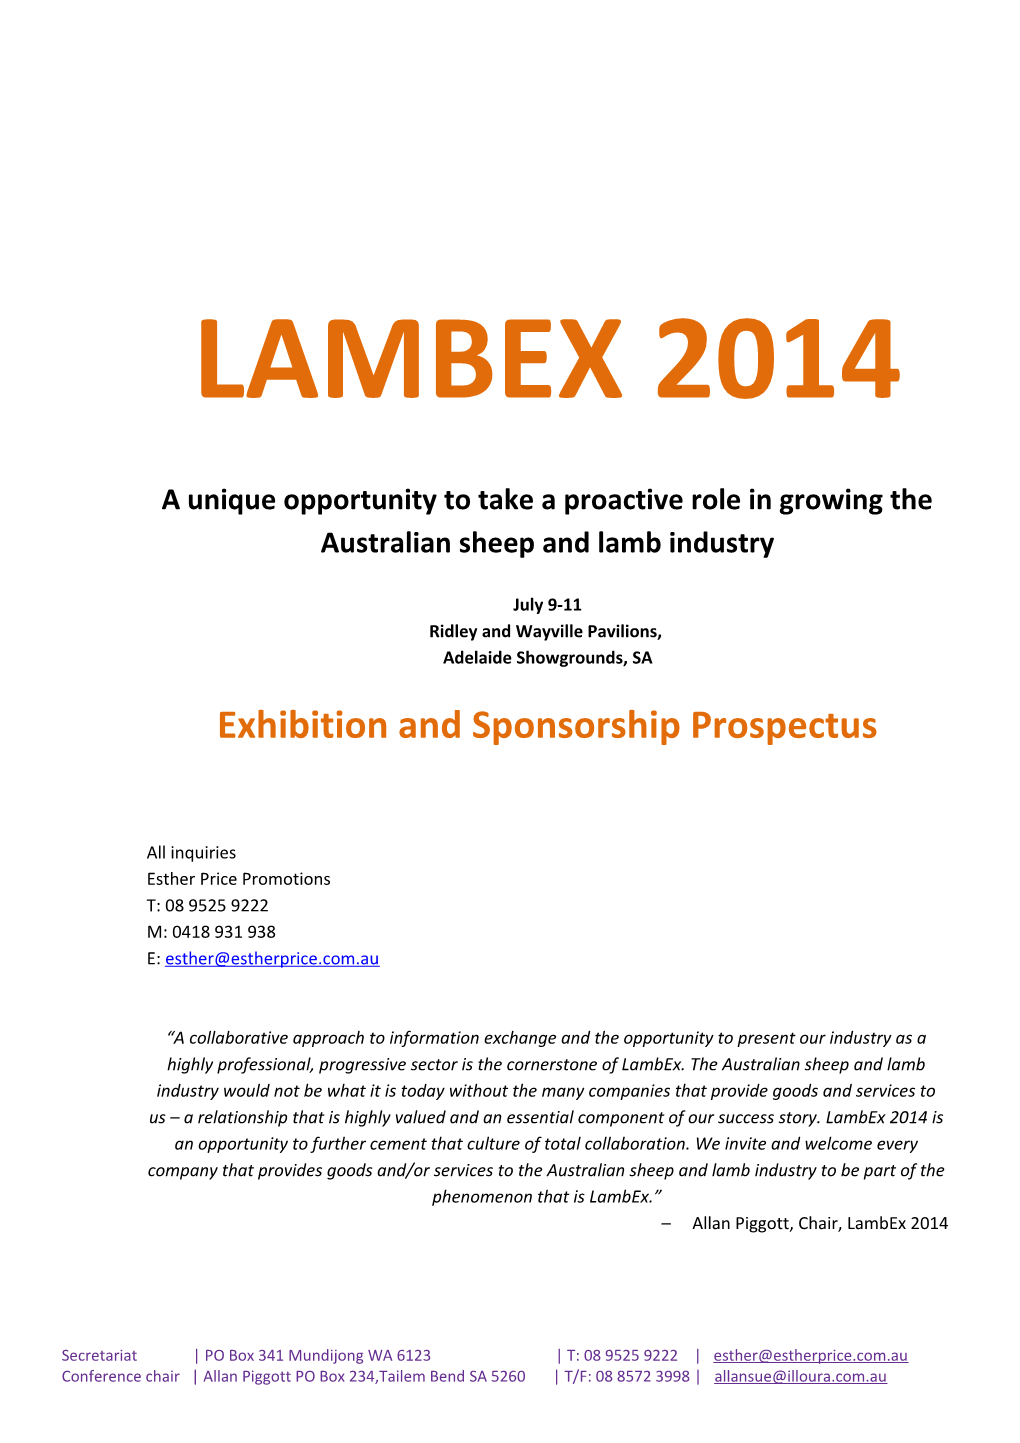 A Unique Opportunity to Take a Proactive Role in Growing the Australian Sheep and Lamb